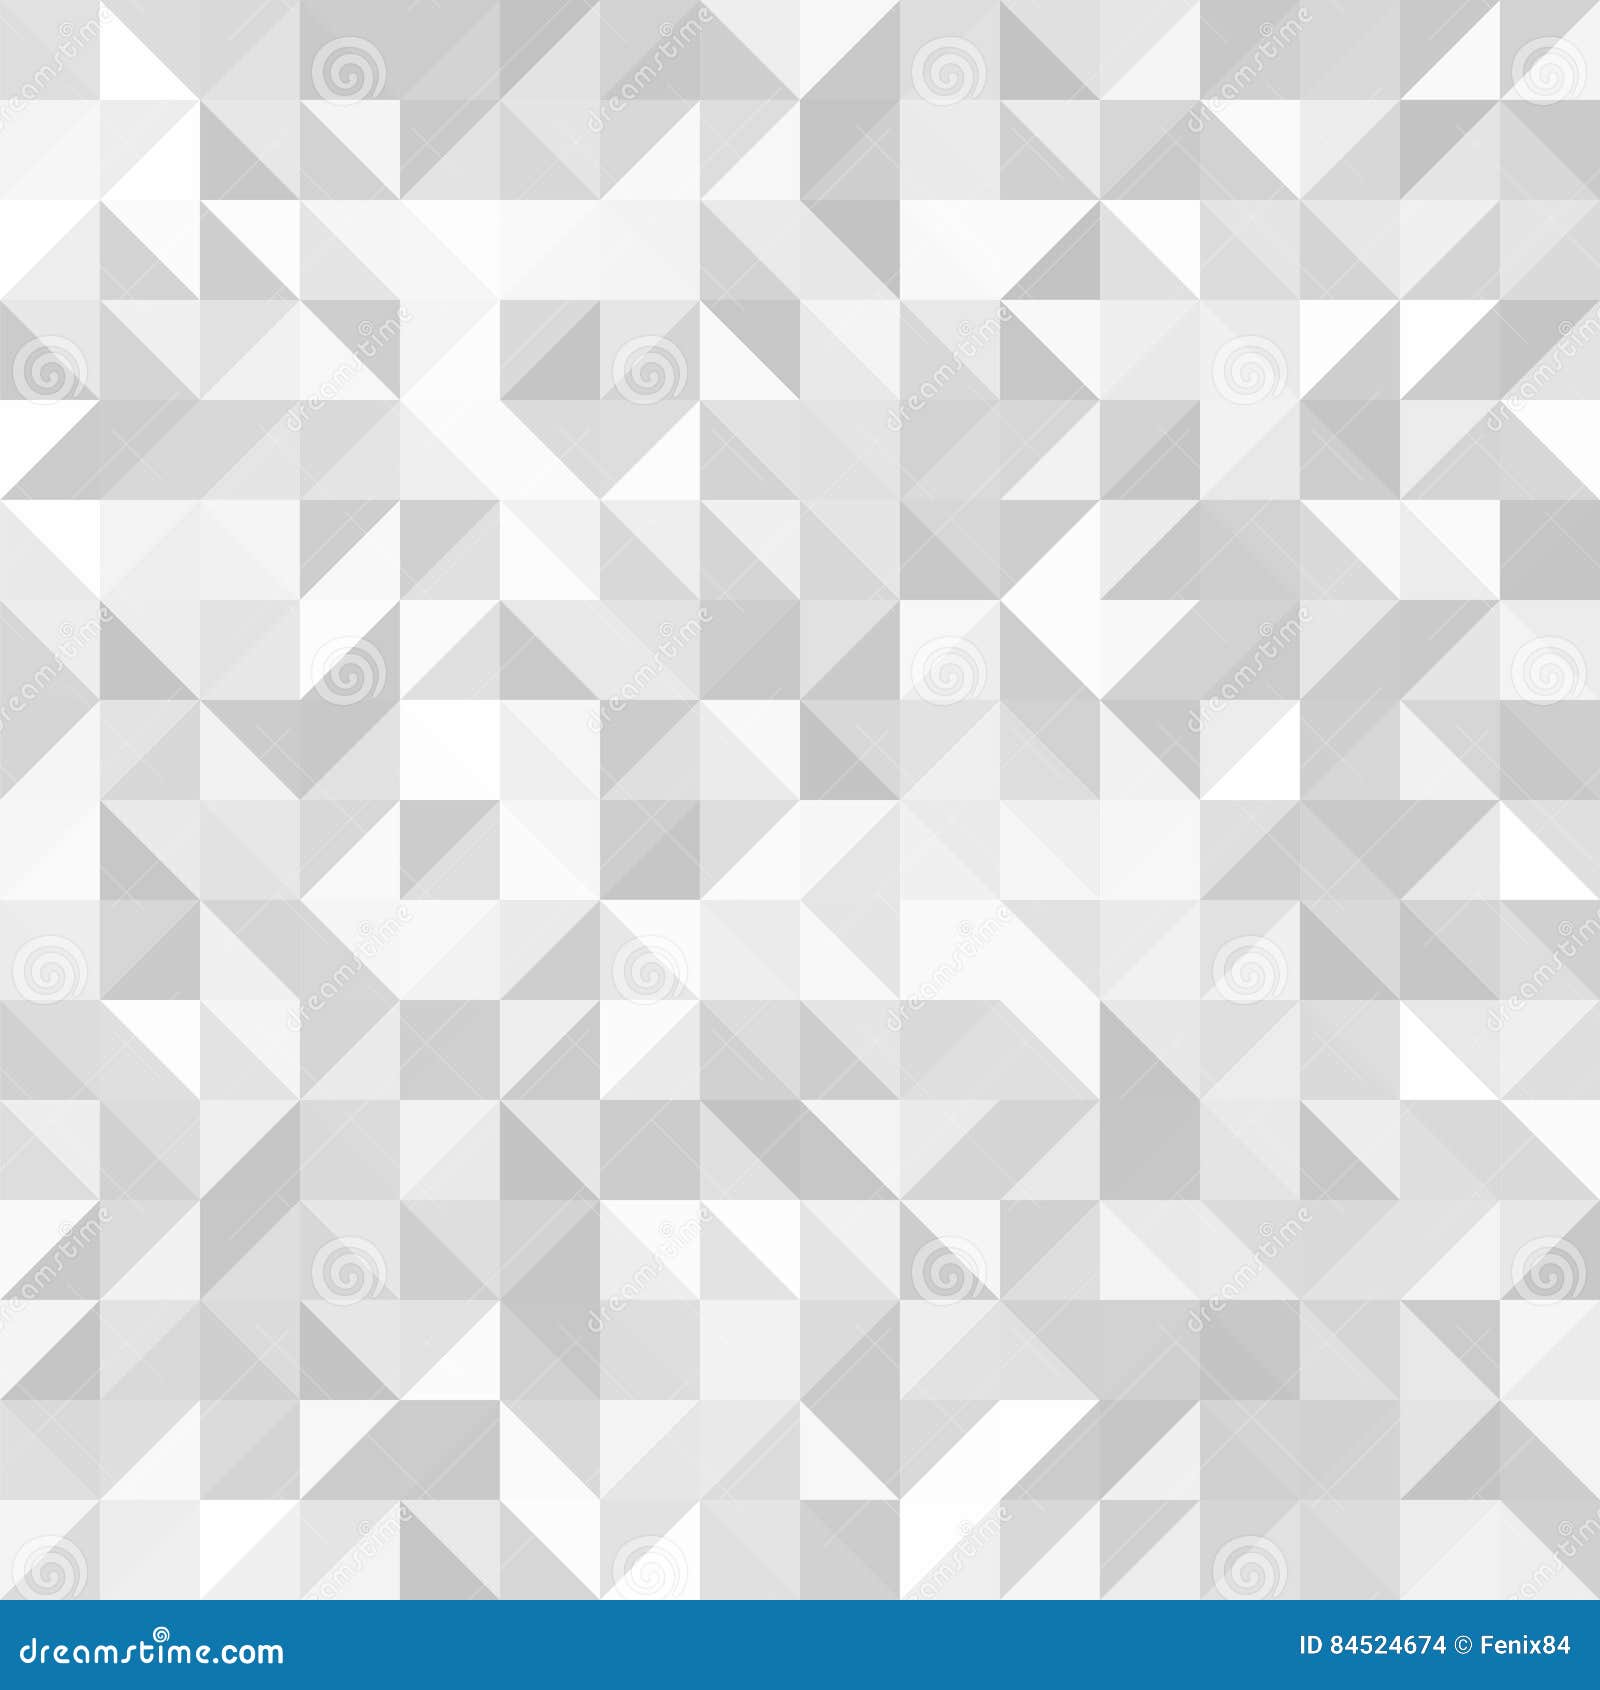 Light Seamless Geometric Background. Abstract Vector Pattern Stock ...